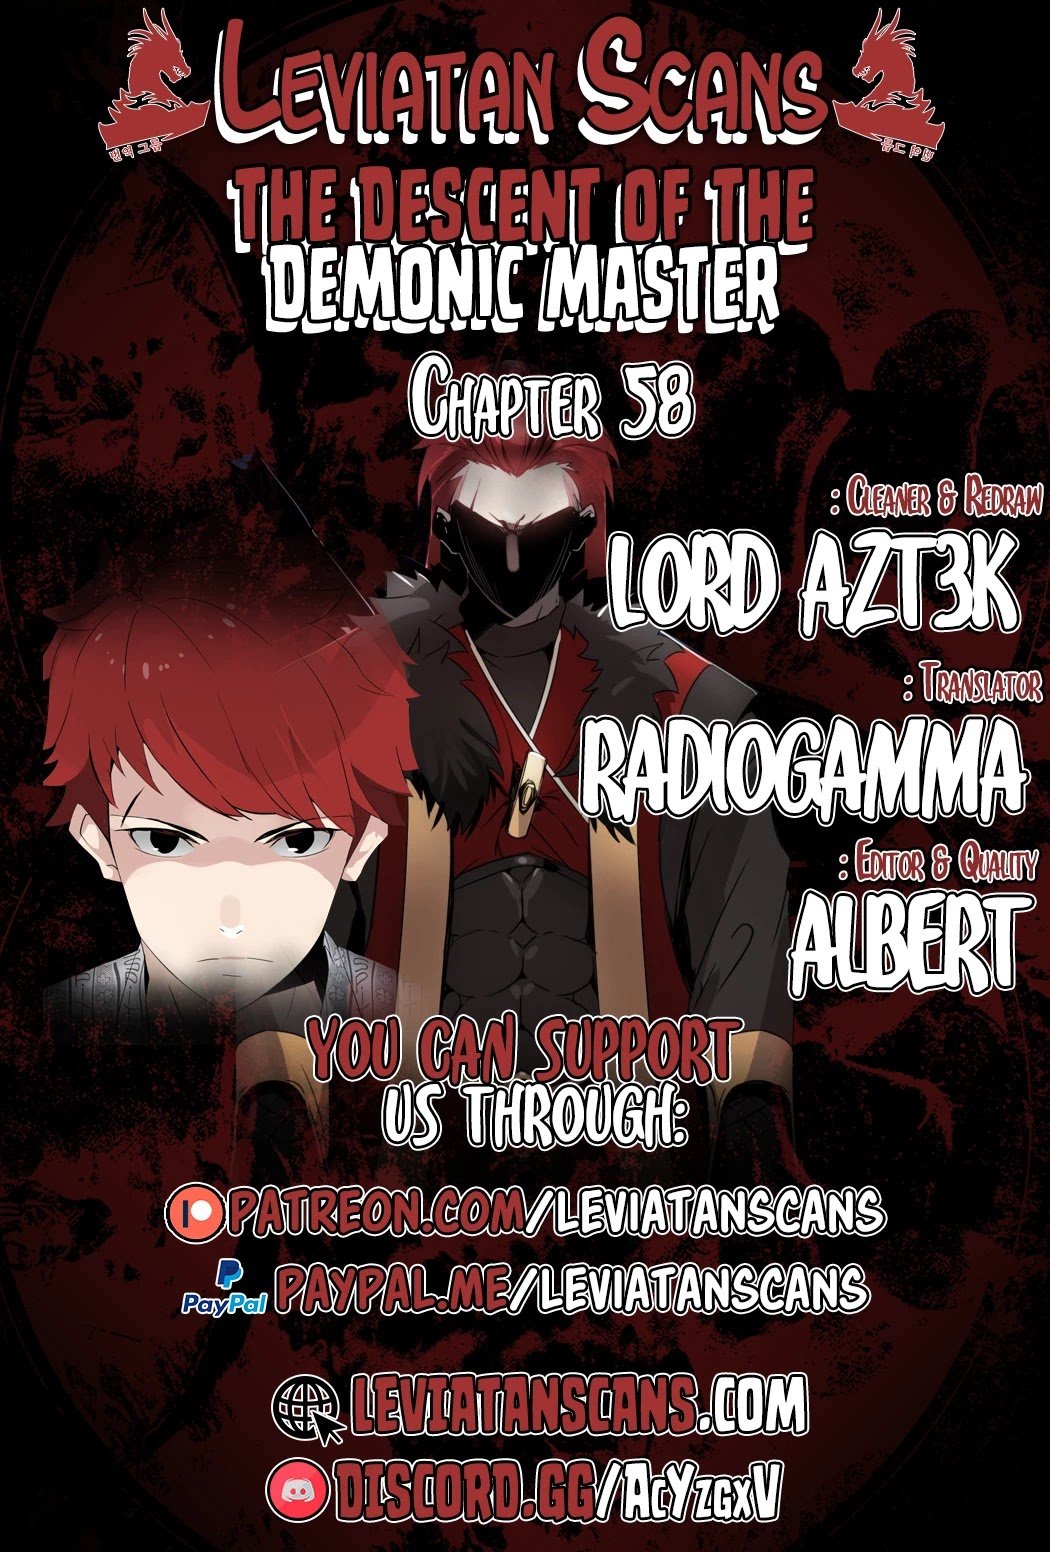 The Descent of the Demonic Master58 01